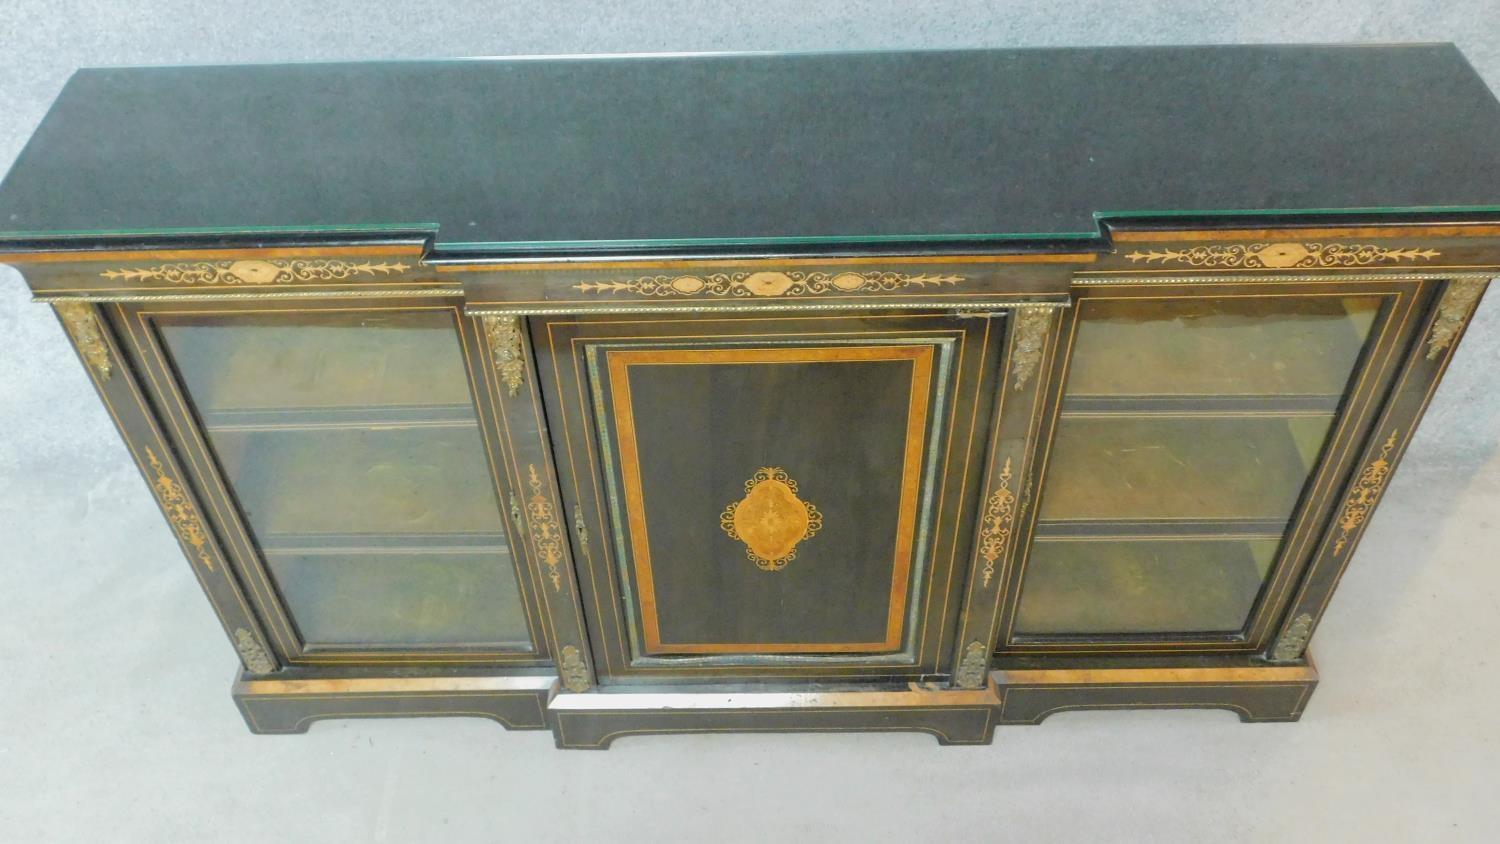 A late Victorian ebonised and satinwood inlaid credenza with ormolu mounts and central panel door - Image 3 of 6